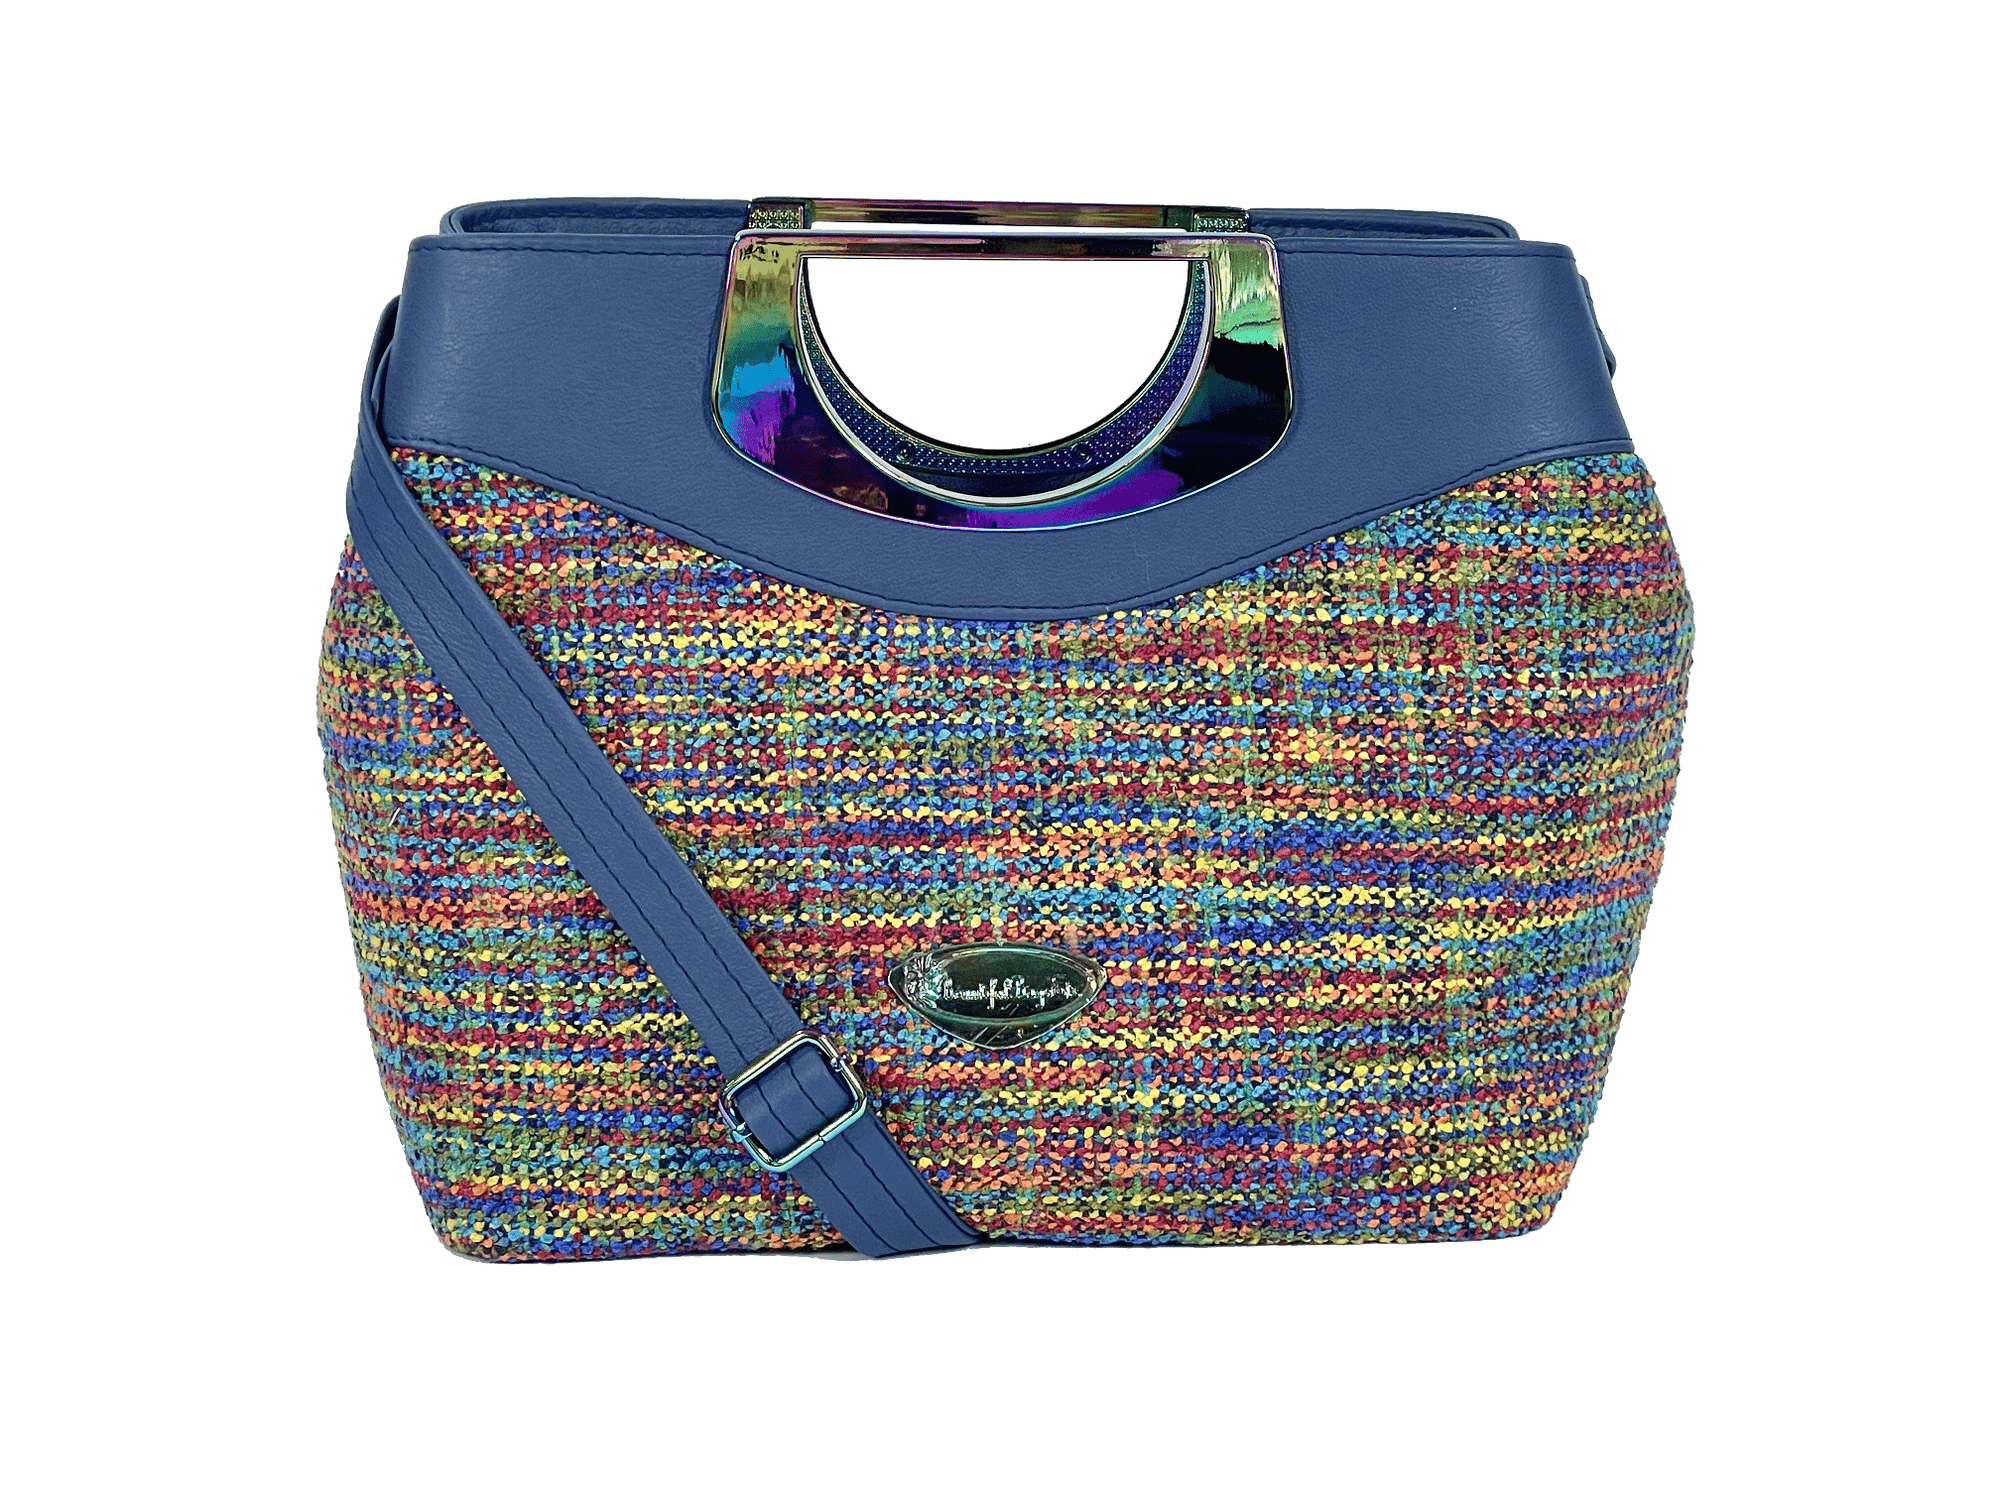 Fifth Avenue Rainbow Tweed and Navy Leather - BeautifulBagsEtc